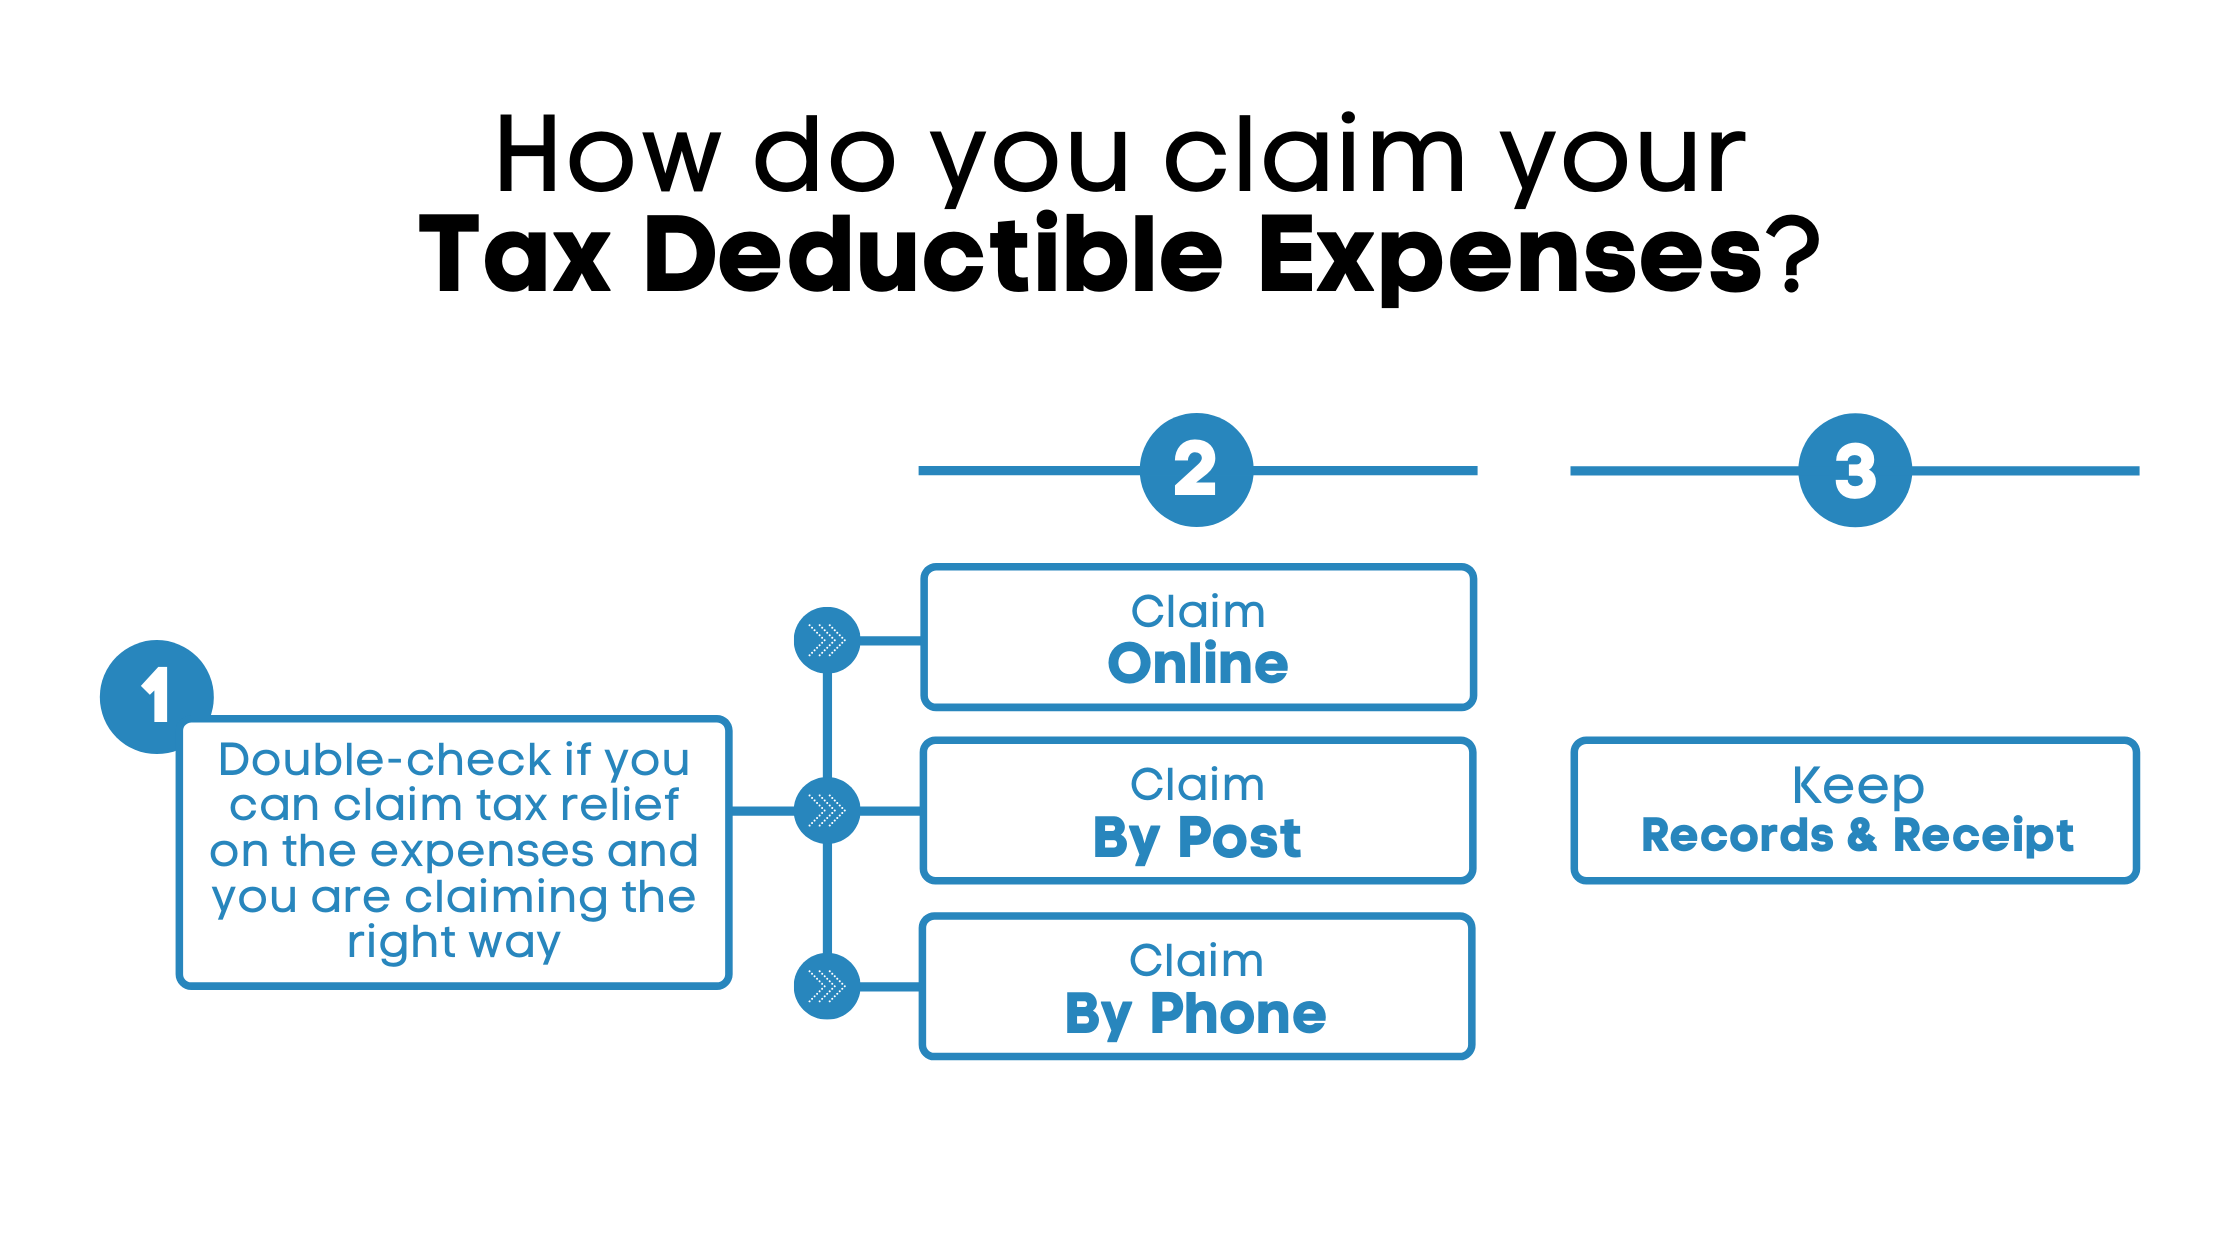 How to claim tax relief on your expenses?